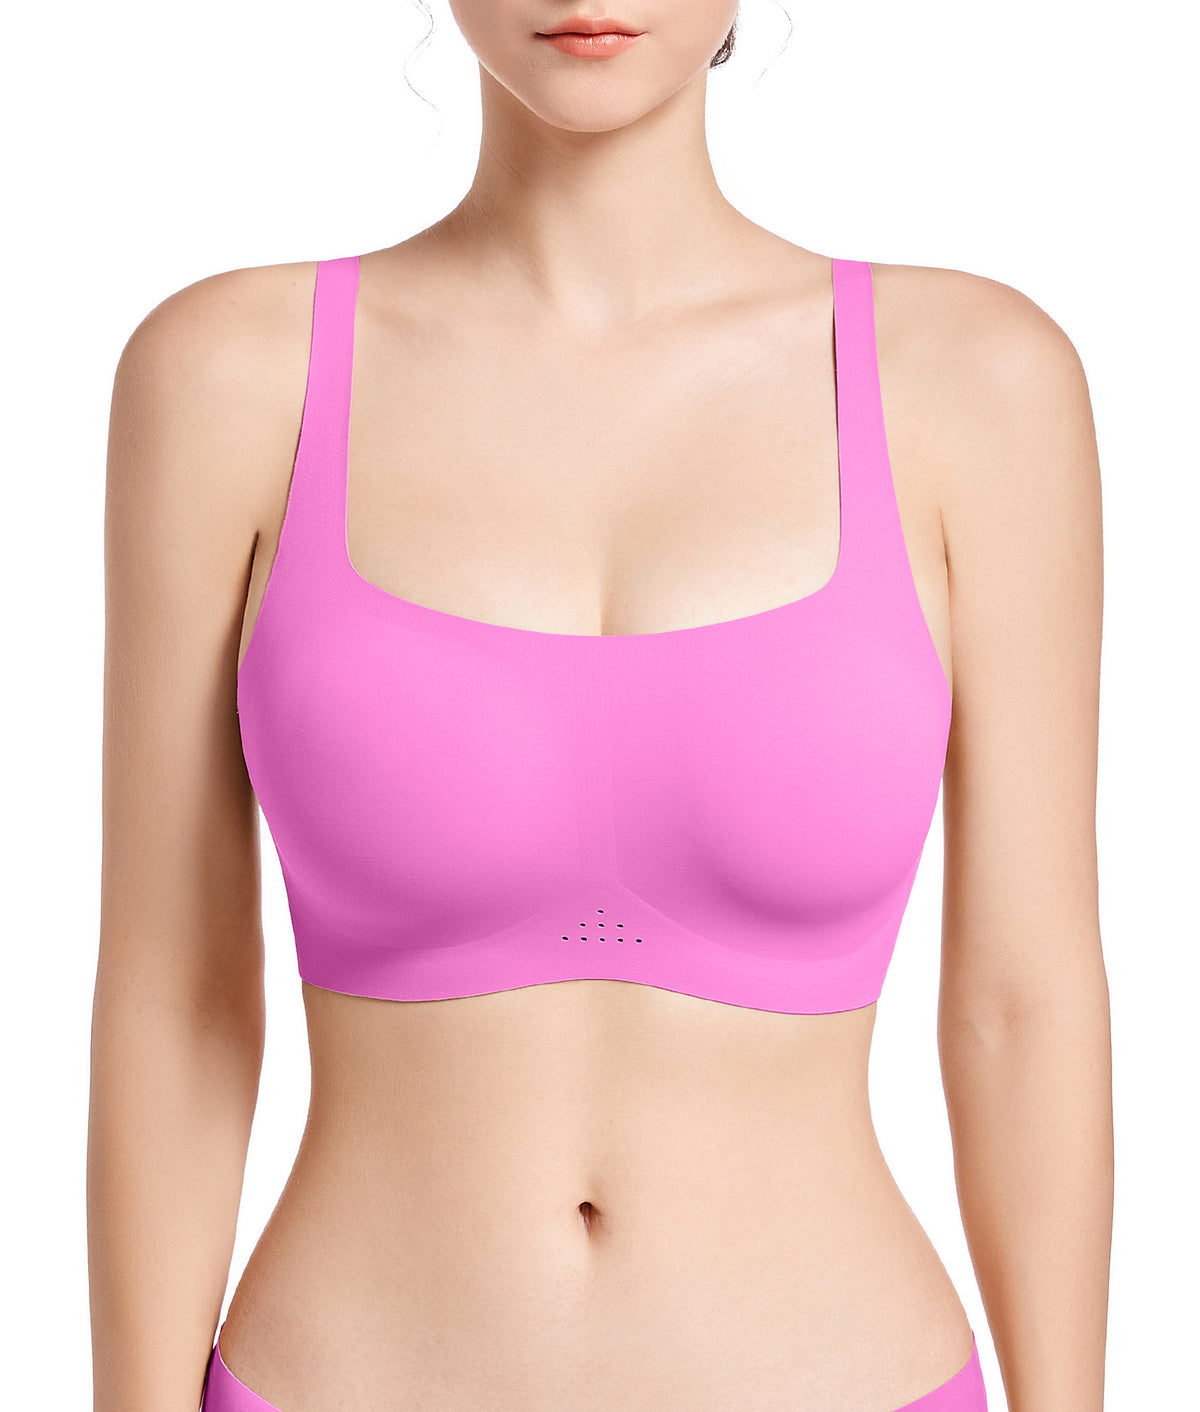 Buy SHAPERX Women's Cotton& Spandex Padded Non-Wired Sports Bra